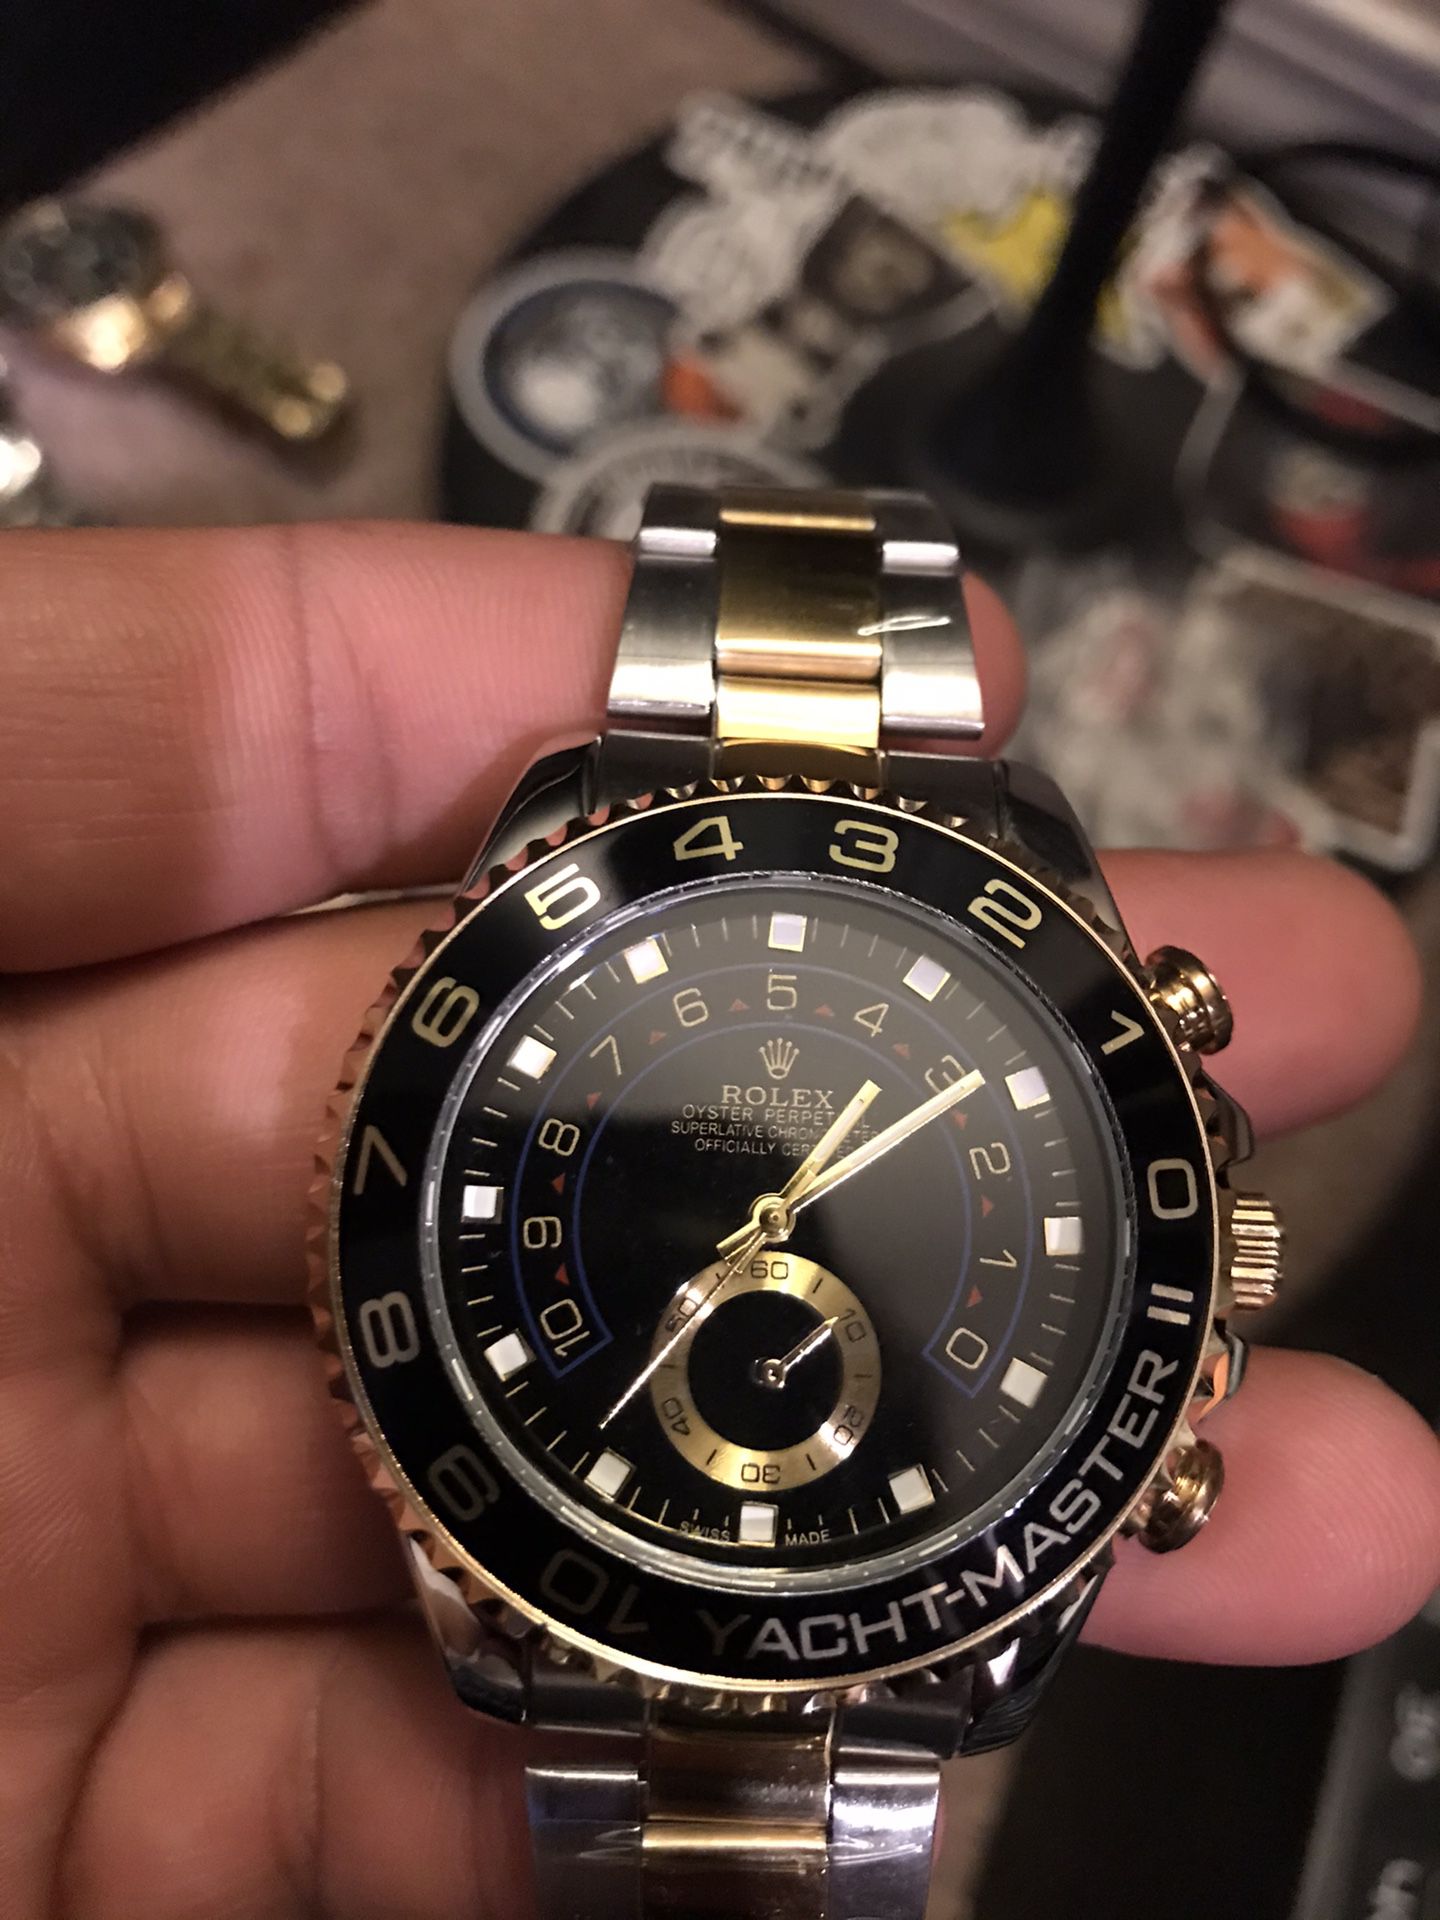 Men’s black and gold watch